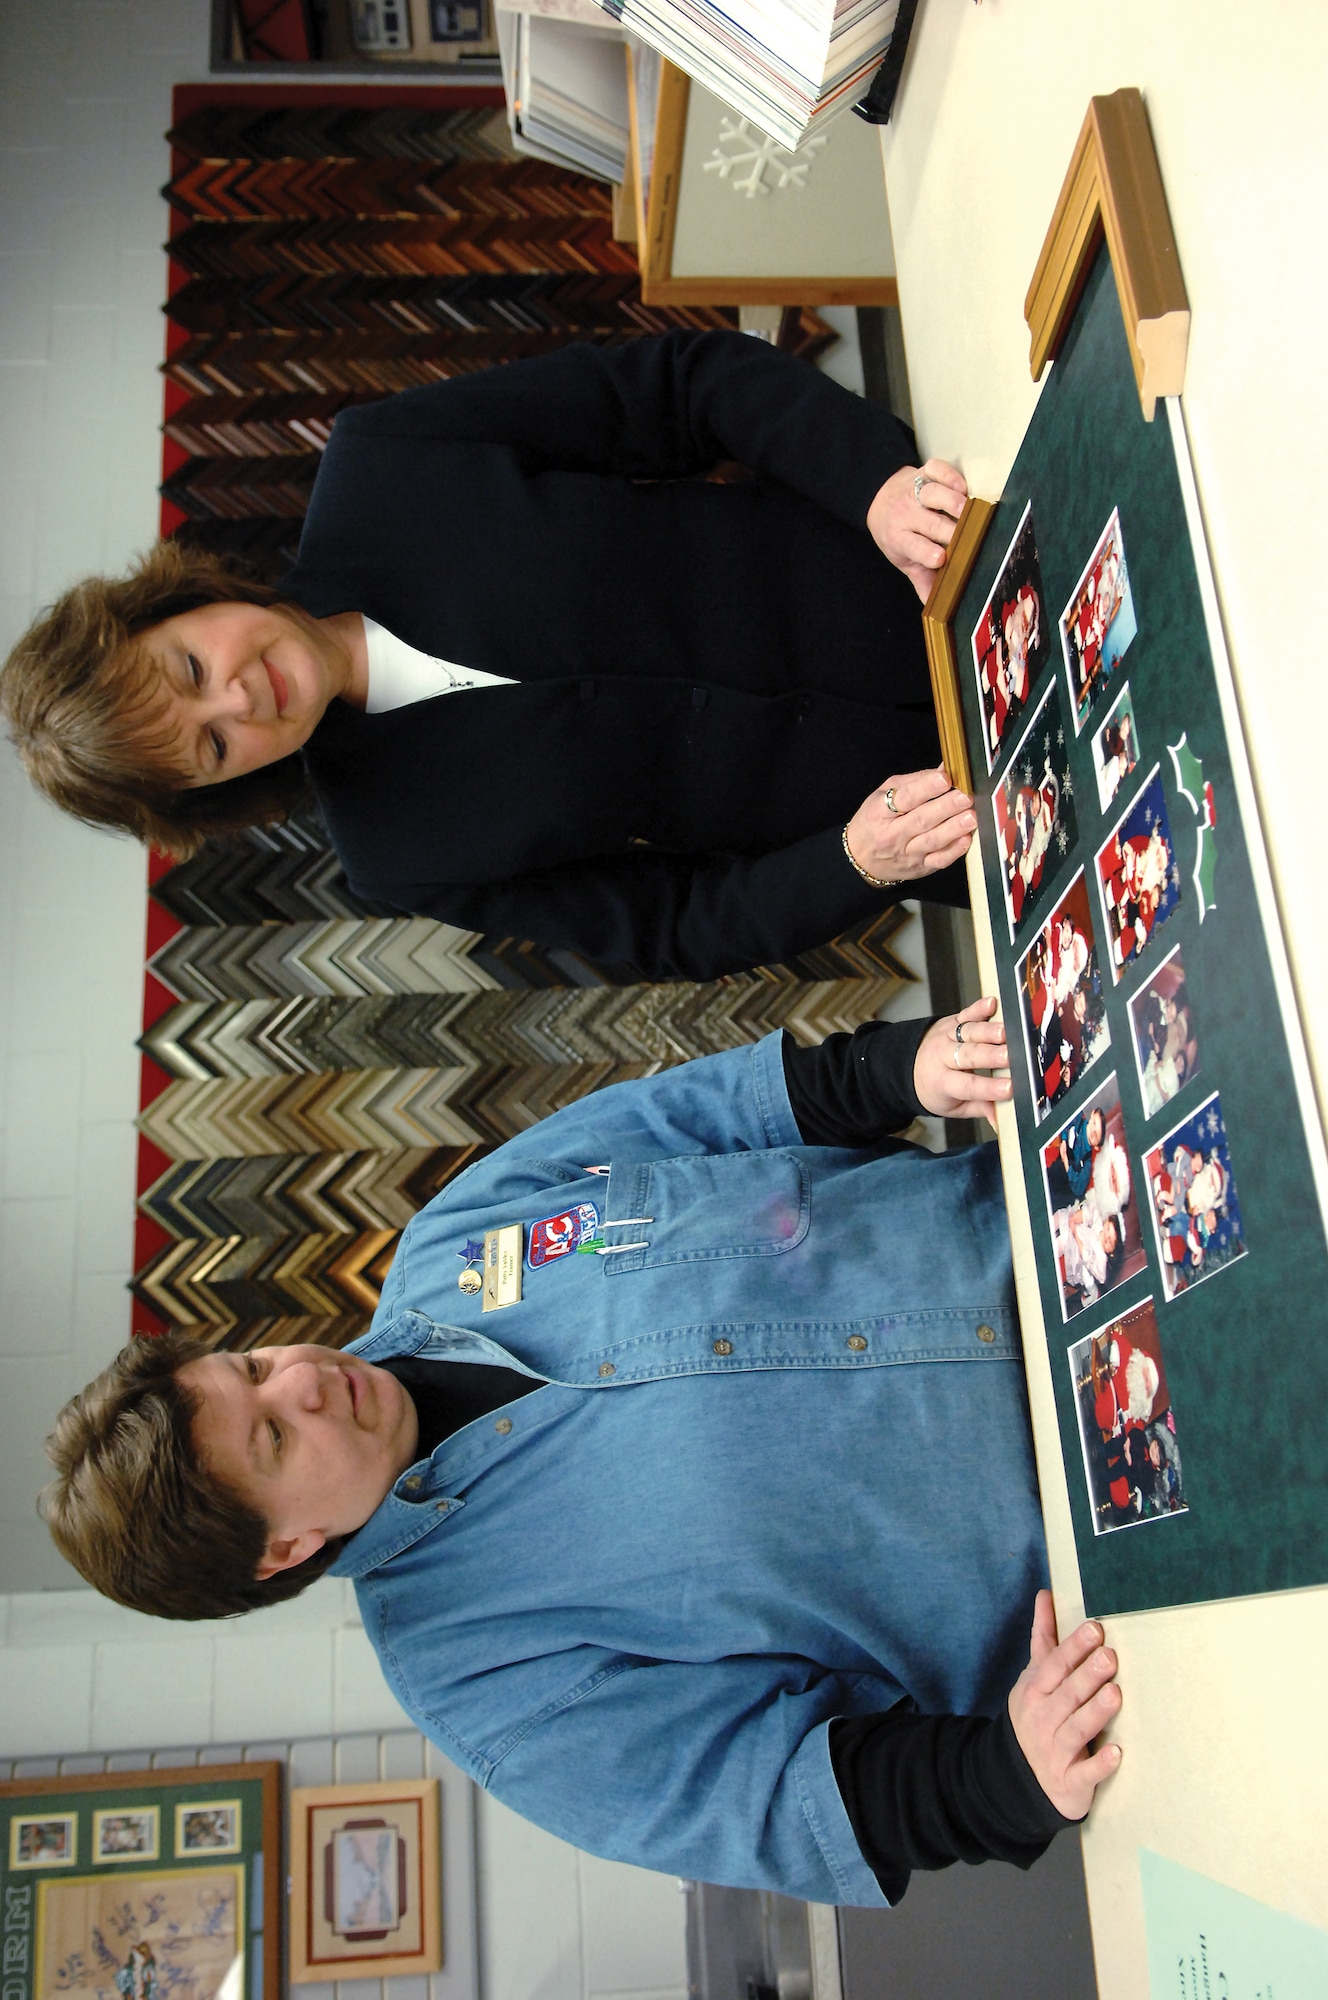 MCCHORD AIR FORCE BASE, Wash.-- Patty Valdez, 62nd Services Squadron, left, discusses projects with sales representative Darcy Beleny Jan. 18 in the arts and crafts frame shop. (U.S. Air Force Photo/Abner Guzman)

